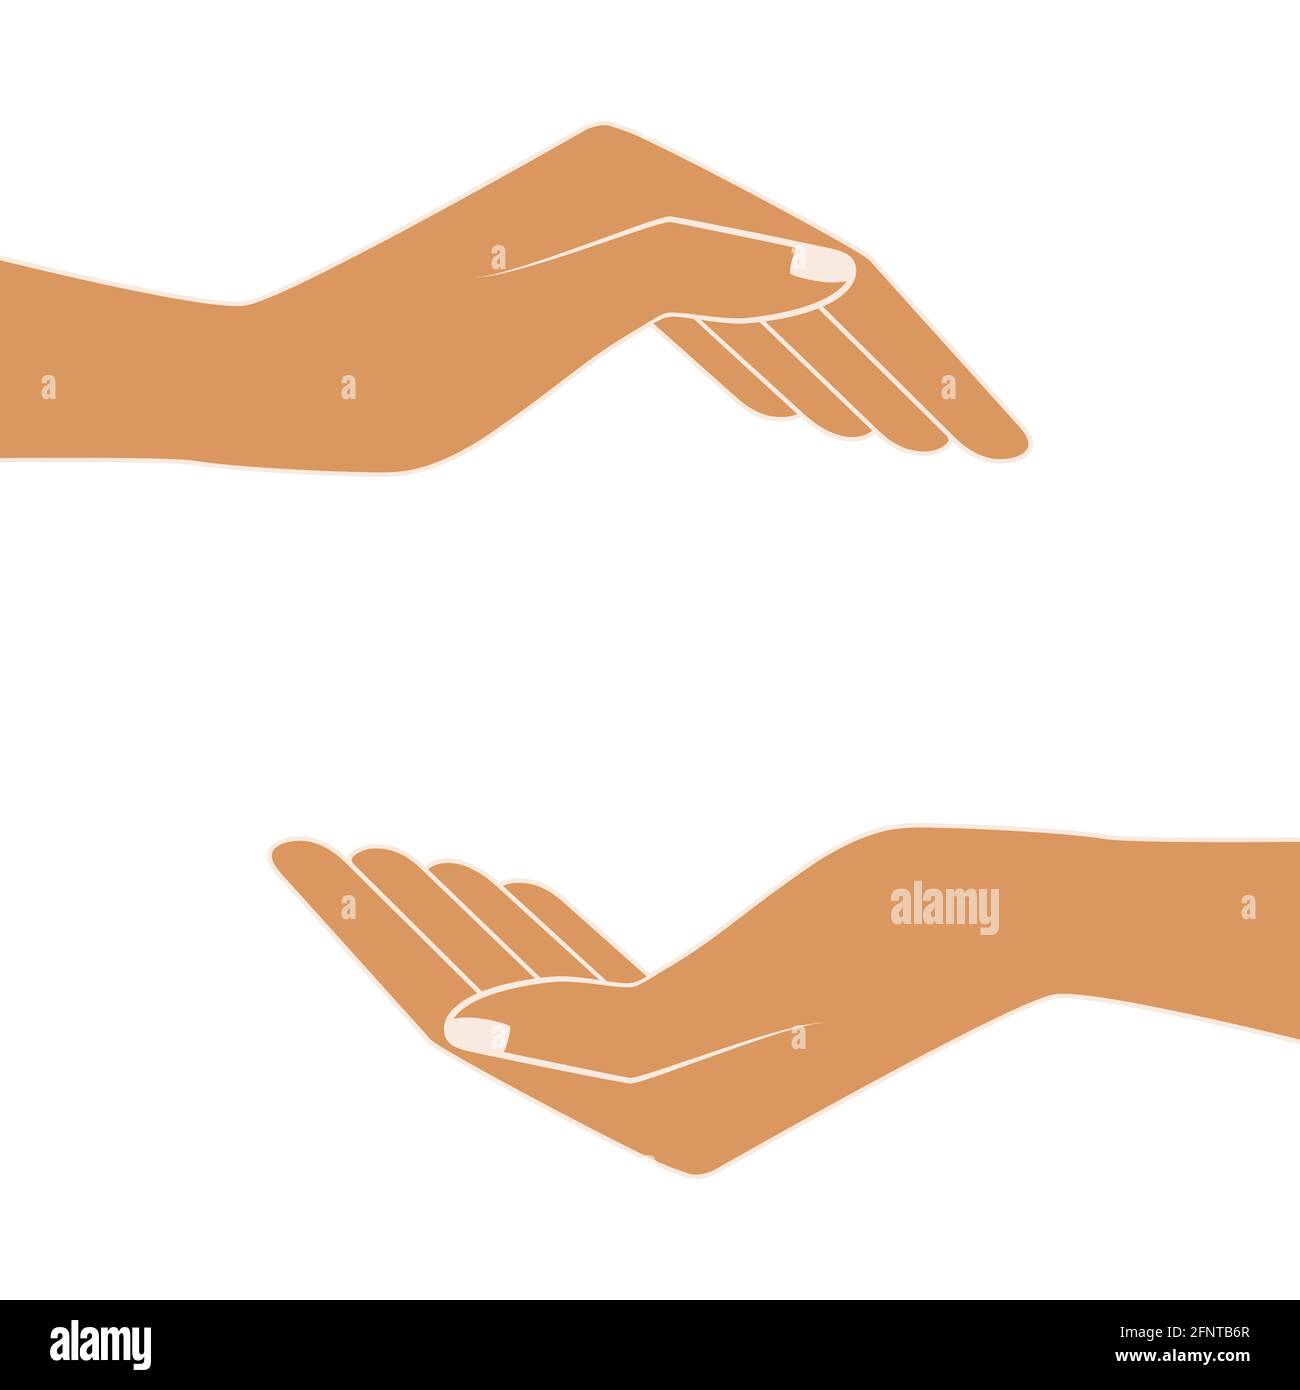 Two hands holding something. Images of hands of people. Free space for the premises of the object. Empty space between hands. Isolated vector illustra Stock Vector